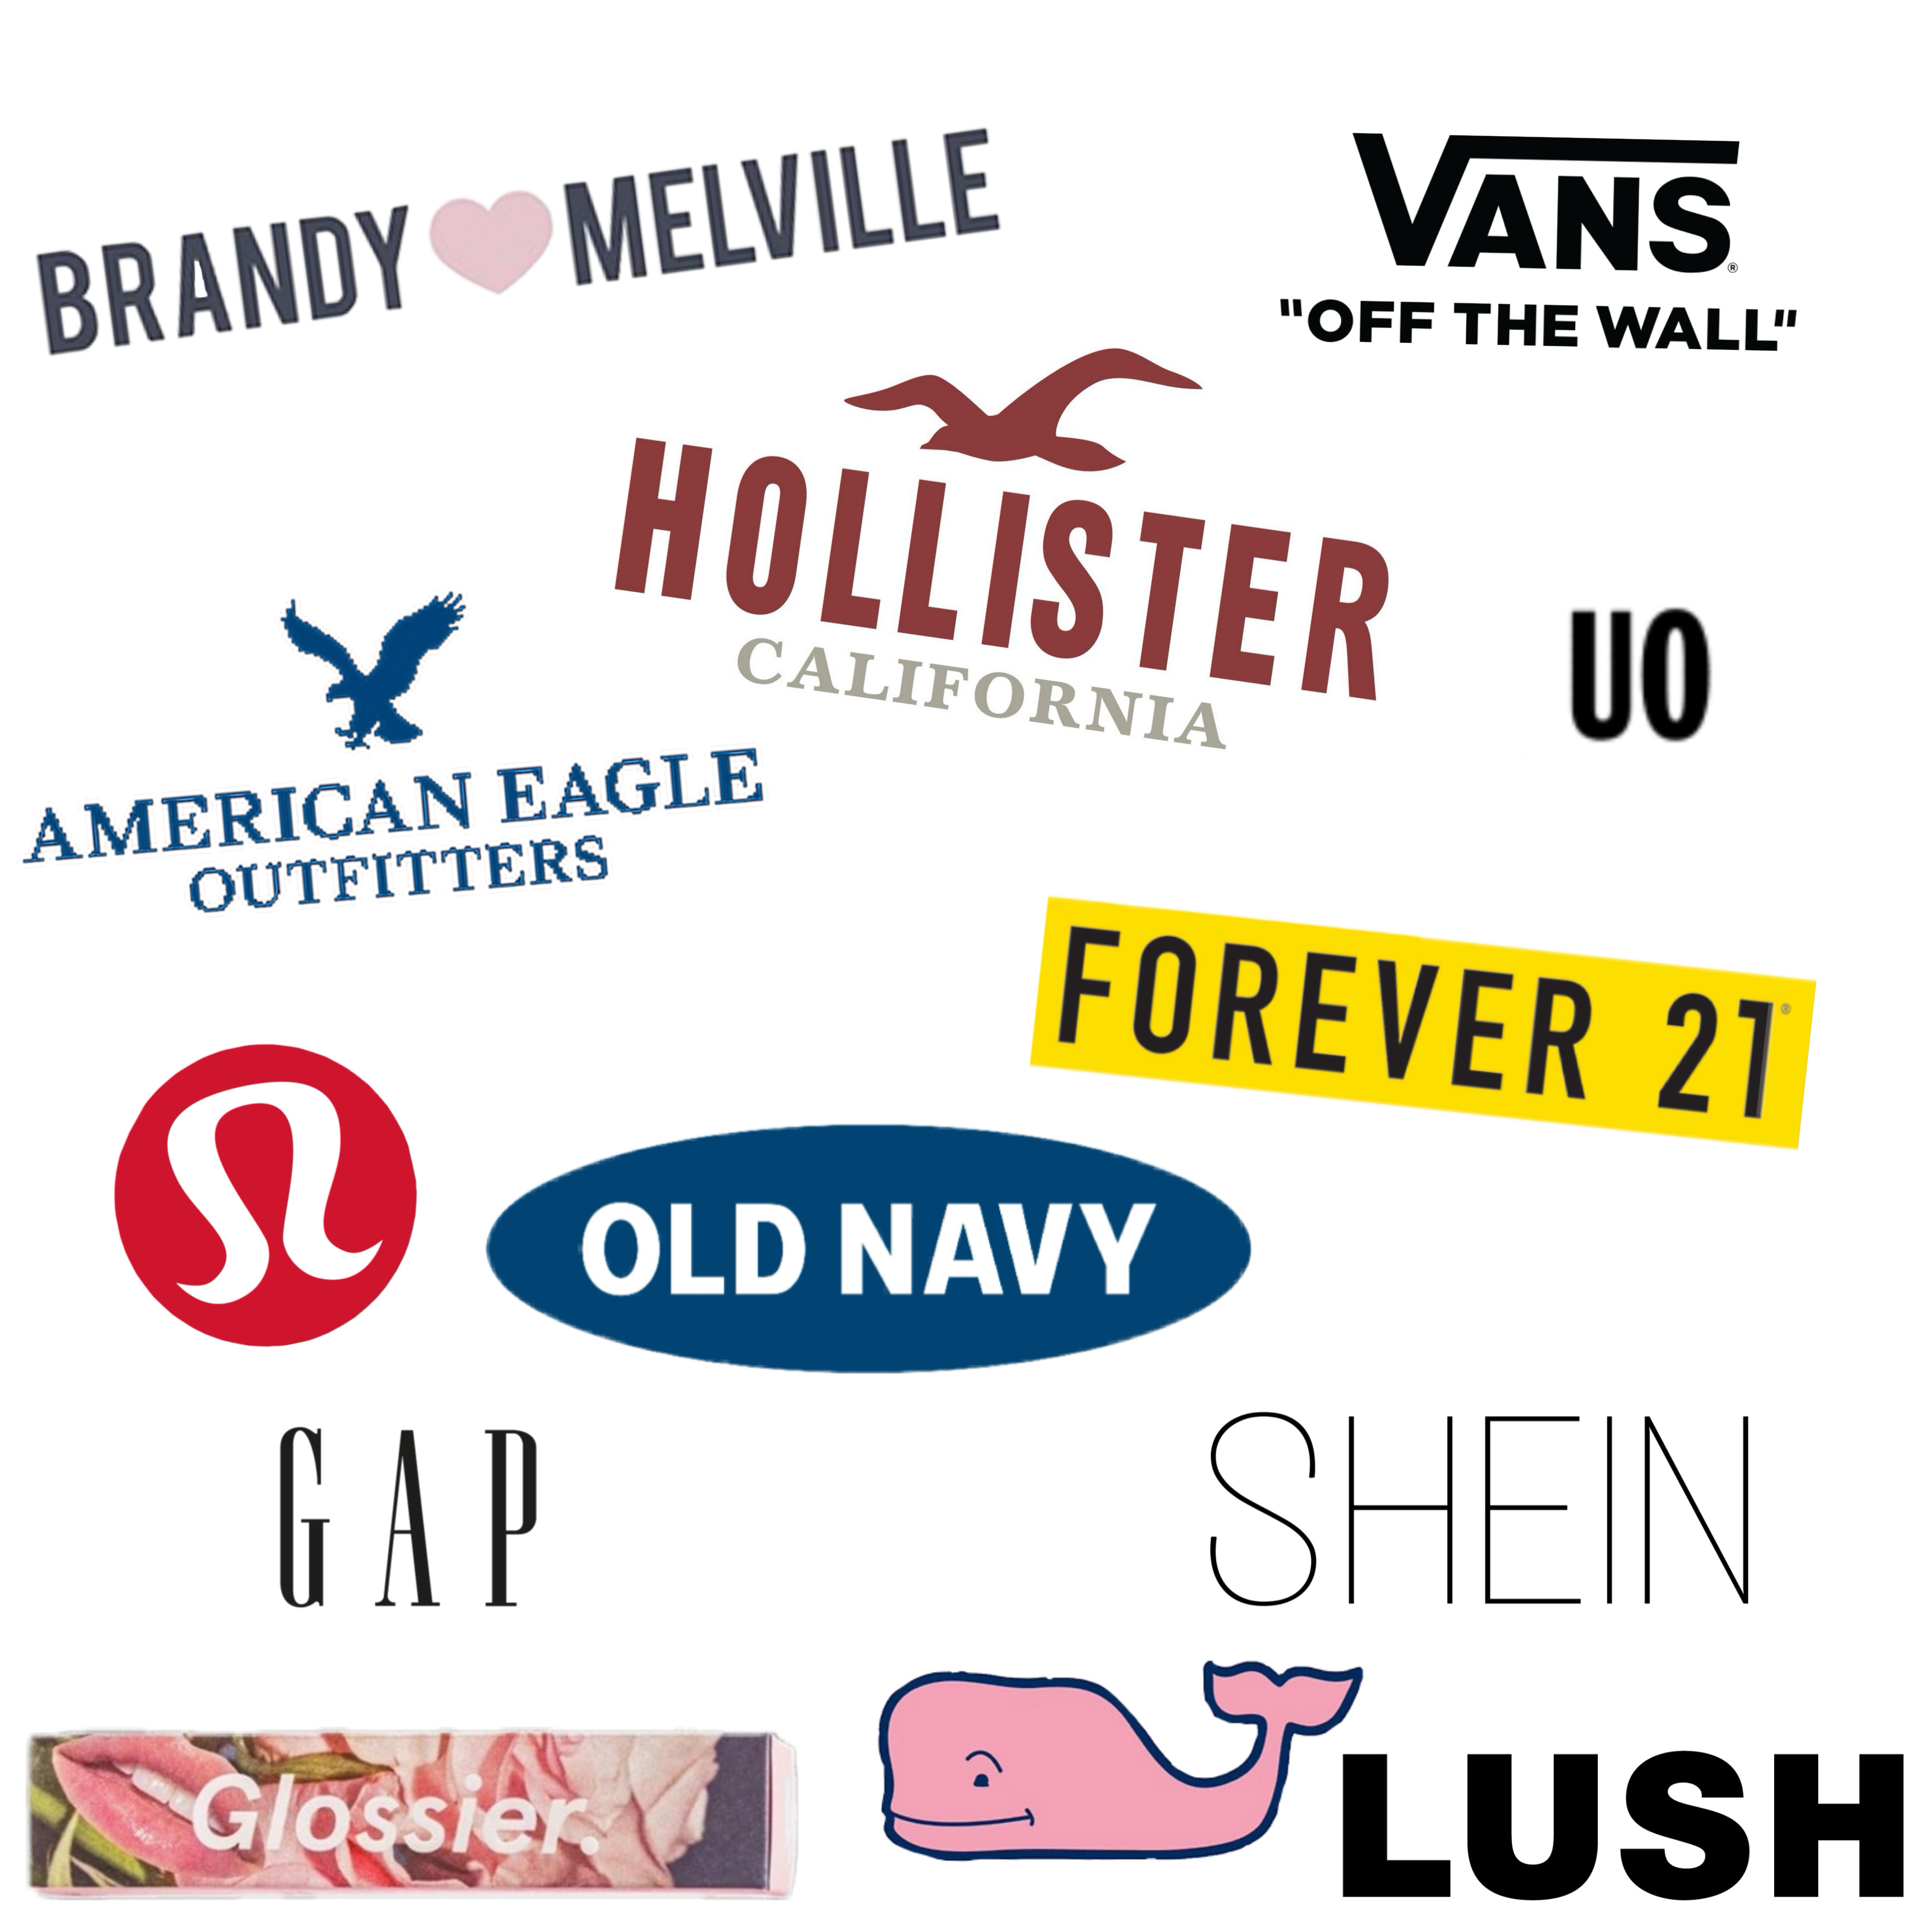 stores like hollister and american eagle